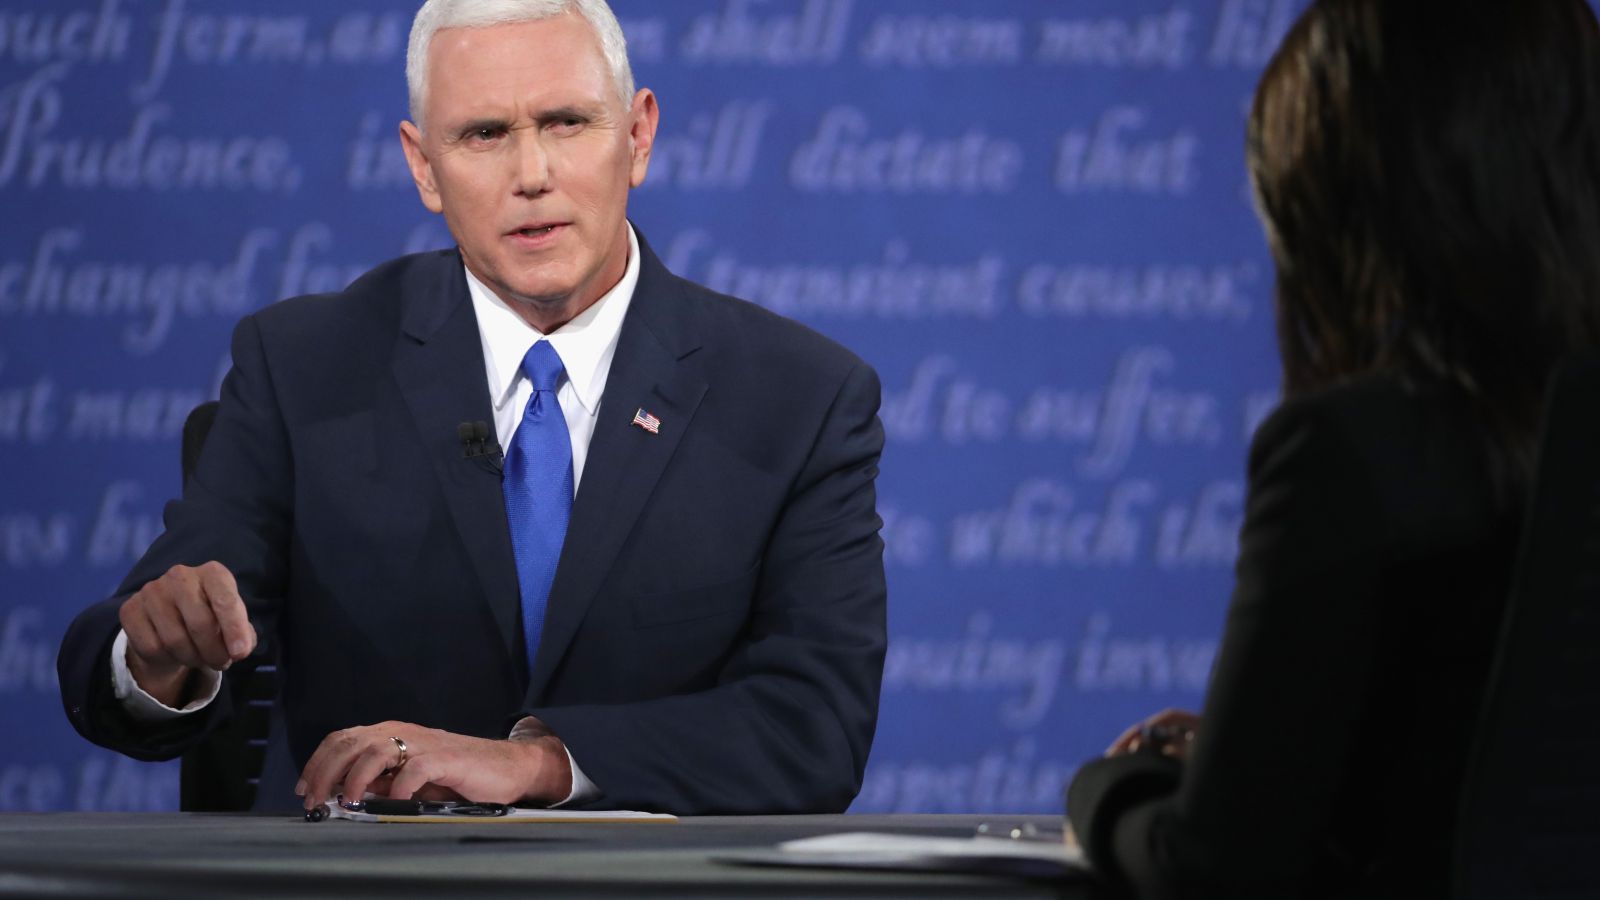 It’s not the first time Pence has called for people to knock off the racism talk. In the wake of police fatally shooting black men in Charlotte, NC, and Tulsa, OK, Pence said there’s “too much of this talk of institutional bias or racism in law enforcement” and that it’s time to “set aside” these conversations.